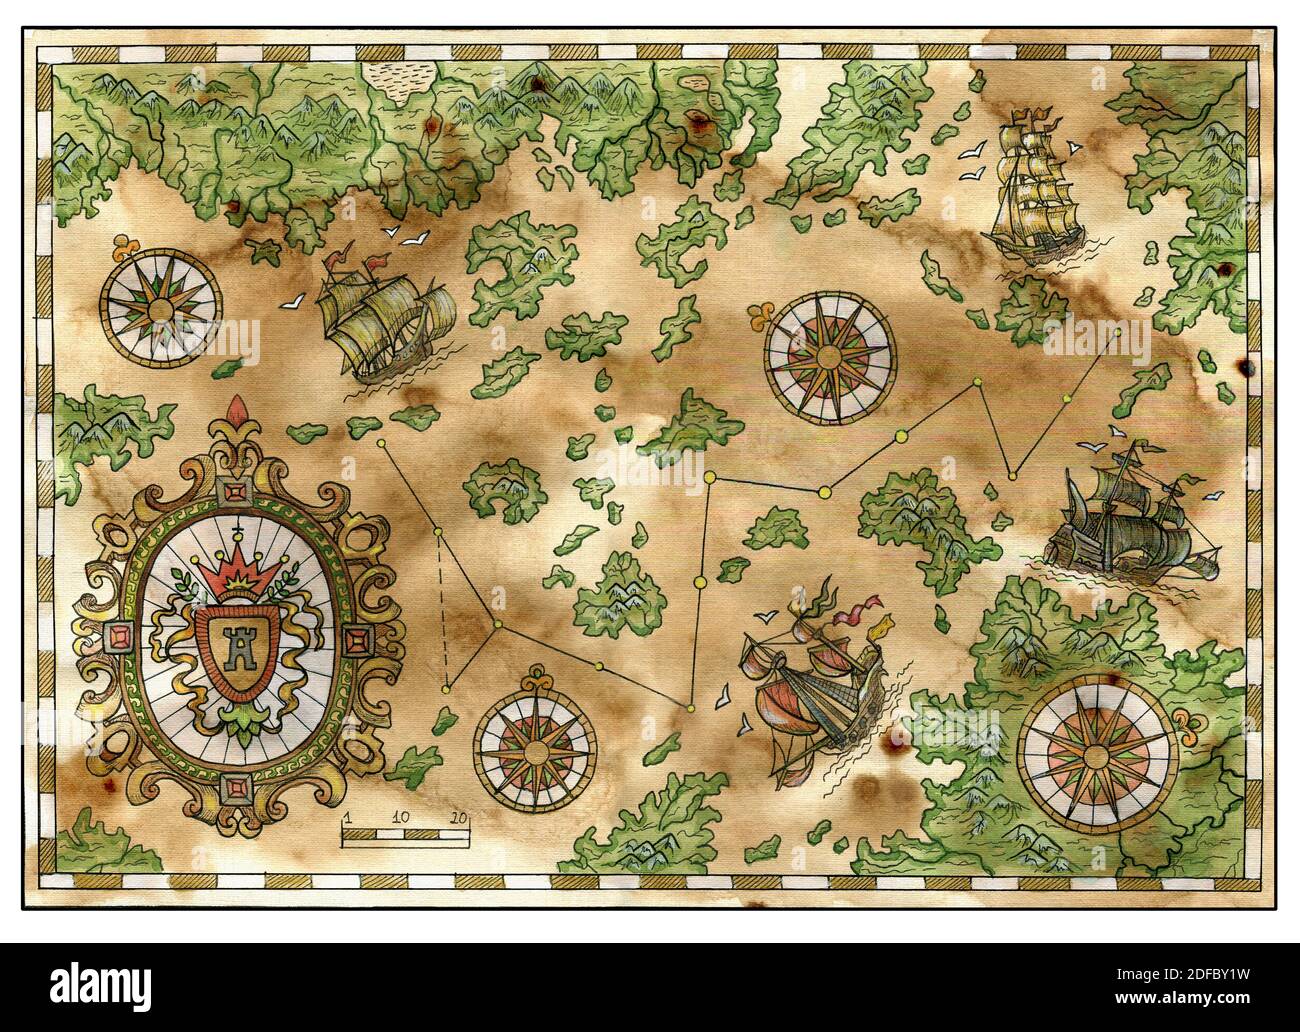 Ancient pirate map with old pirate sailboats, treasure islands. Decorative antique background with nautical chart, adventure treasures hunt concept Stock Photo